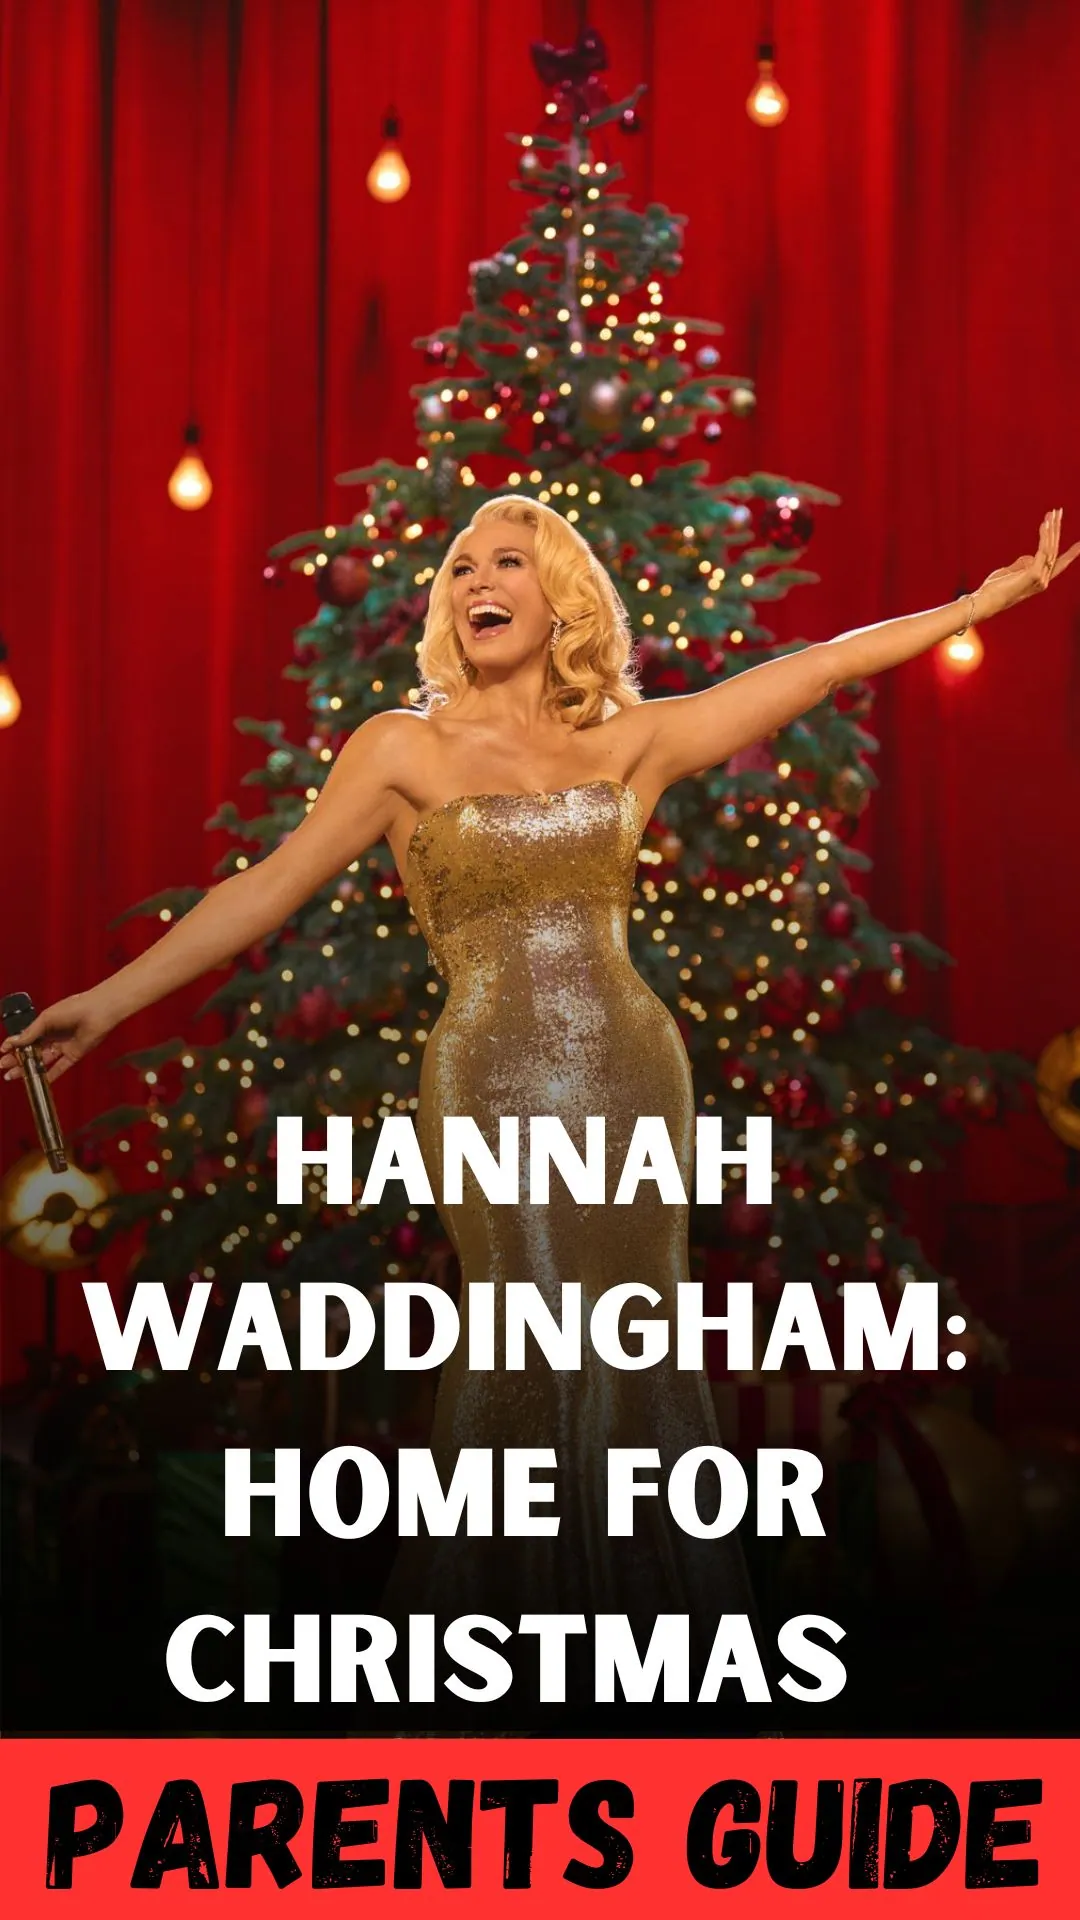 Hannah Waddingham Home For Christmas Parents Guide (1)